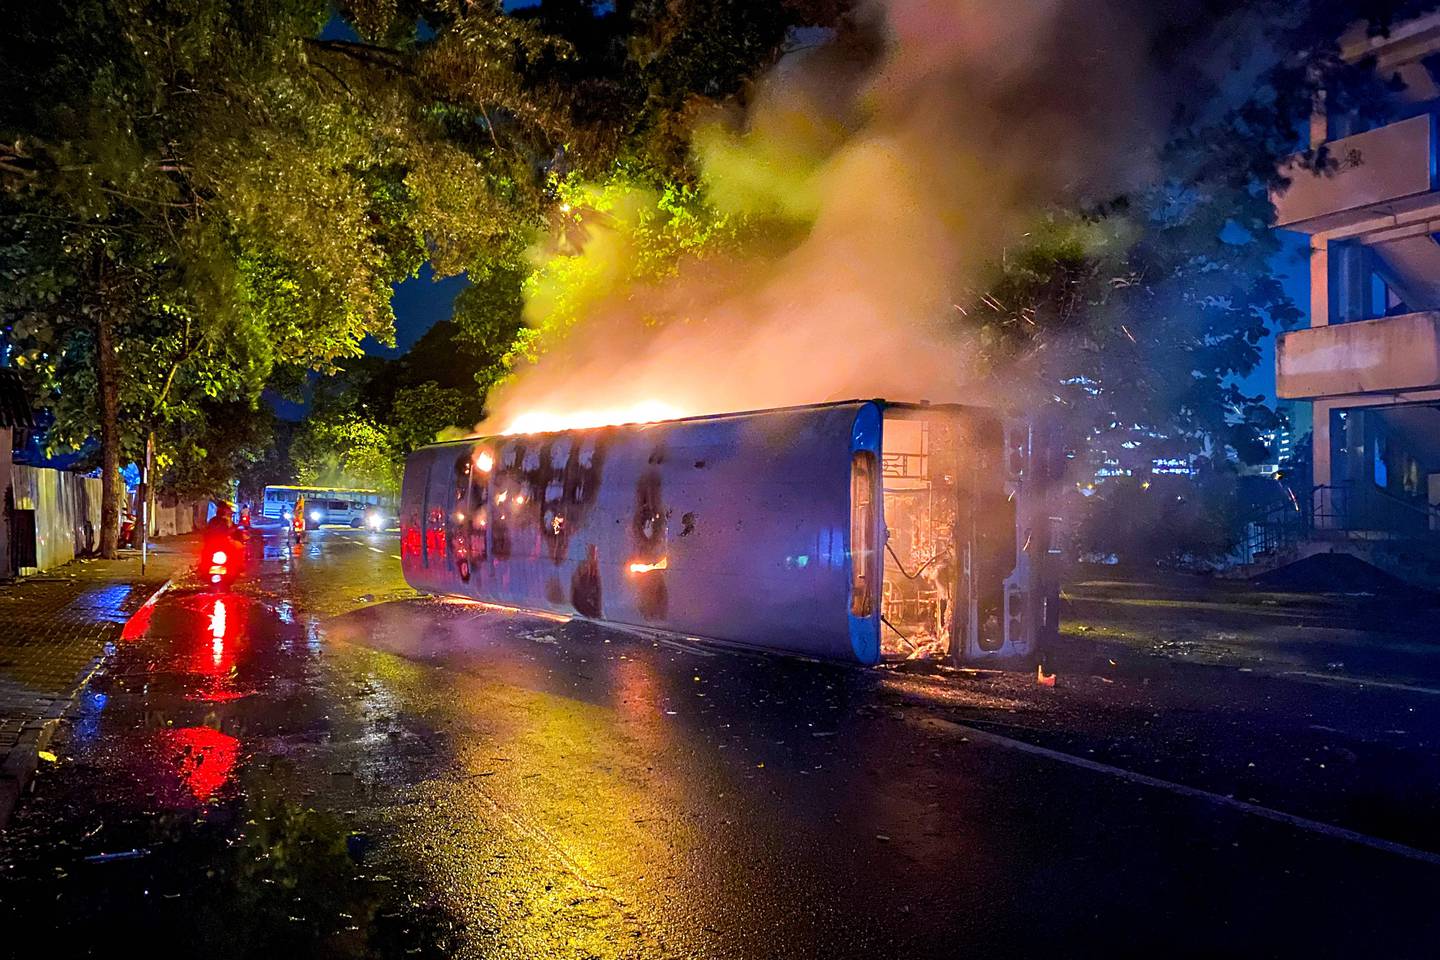 Dozens of buses used by Rajapaksa loyalists to travel to Colombo earlier in the day were torched or damaged. AFP